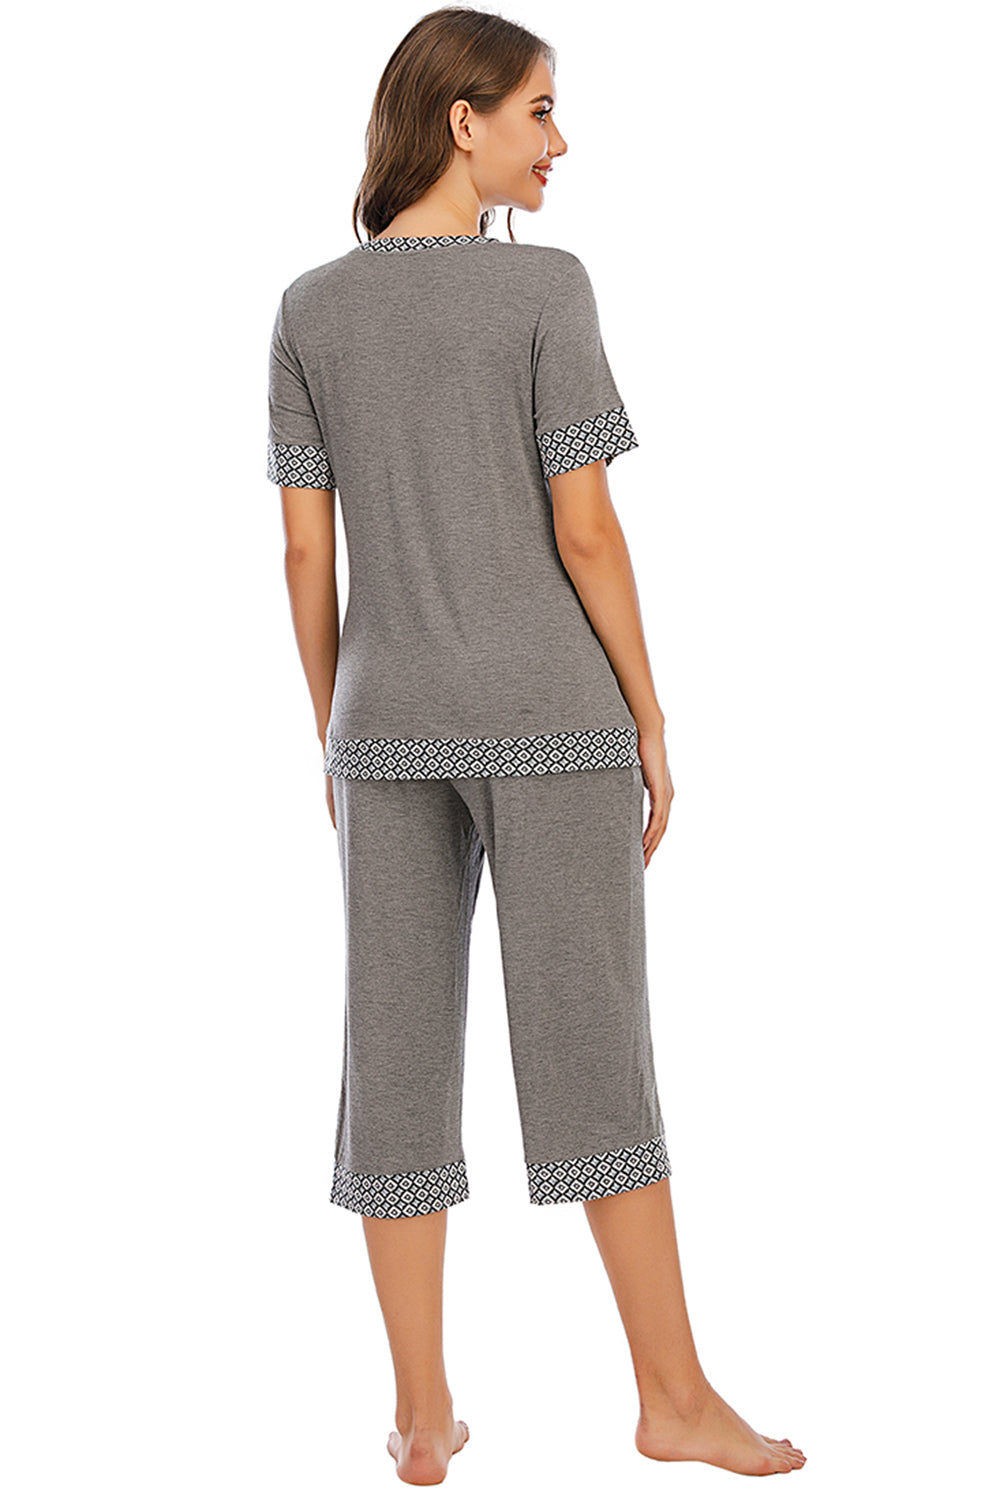 Experience cozy chic with our Round Neck Capri Lounge Set. Perfect for stylish comfort at home or out. Available in gray, navy, and red.